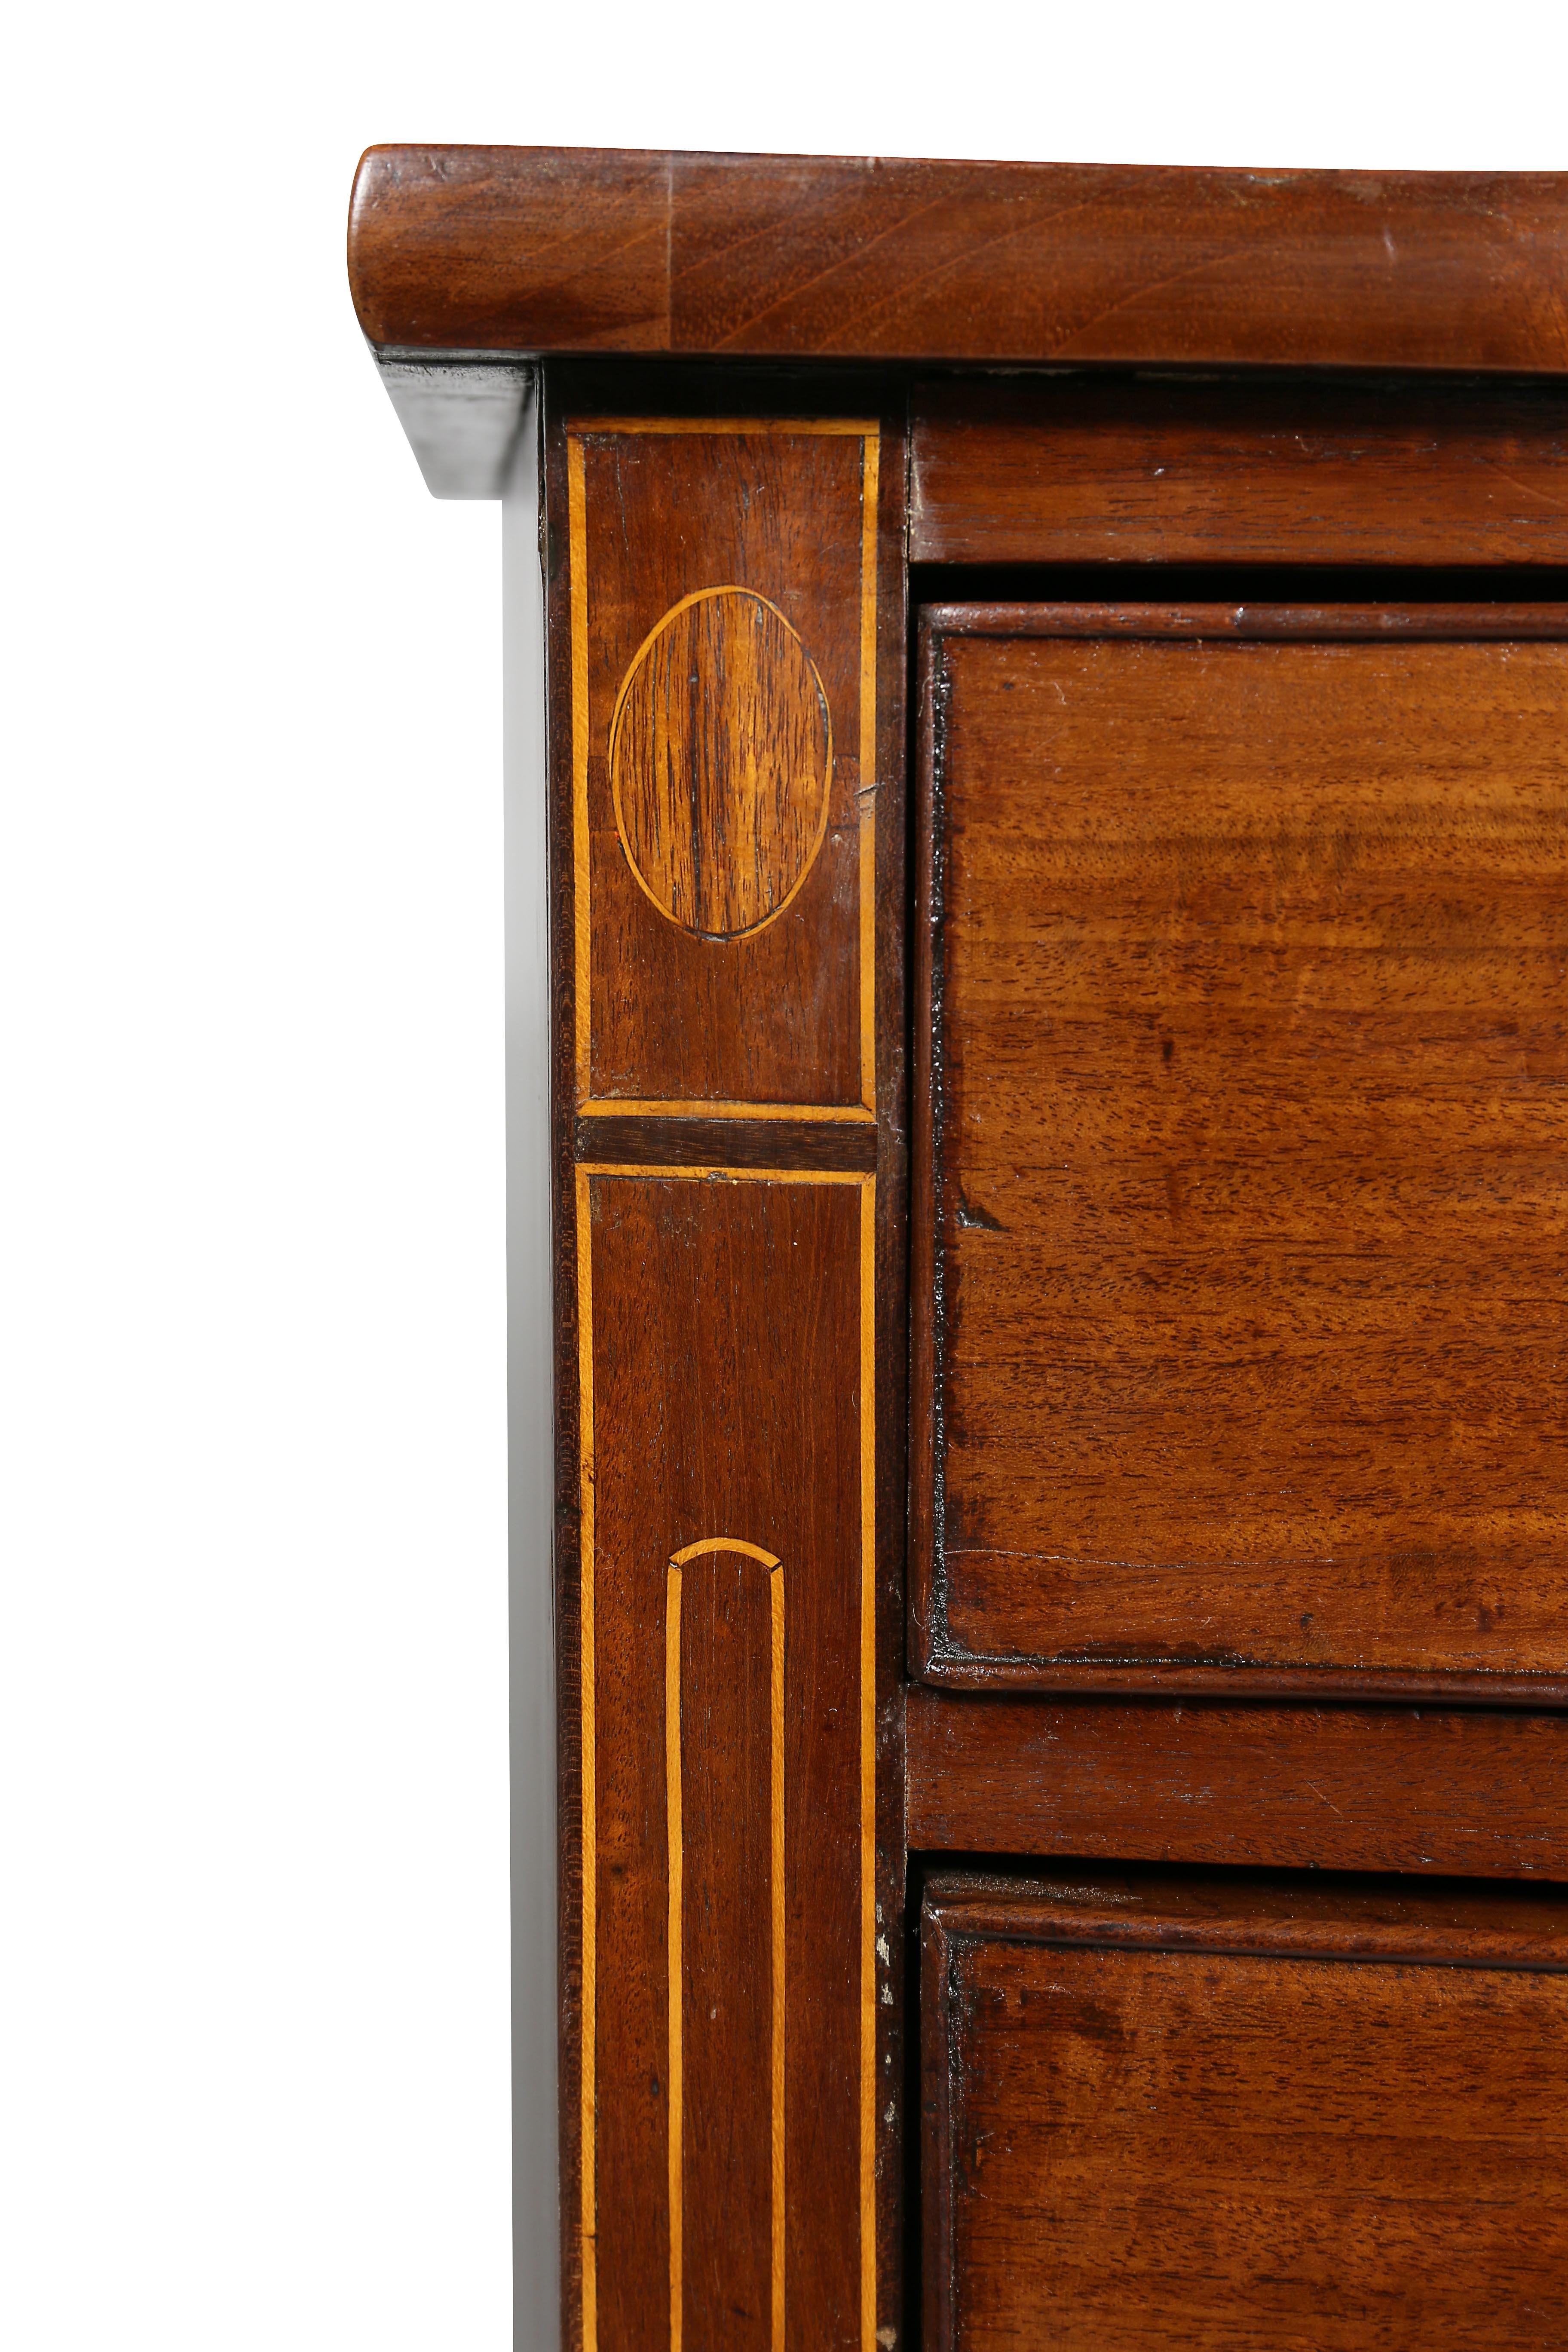 Late 18th Century George III Mahogany and Inlaid Bowfront Chest of Drawers